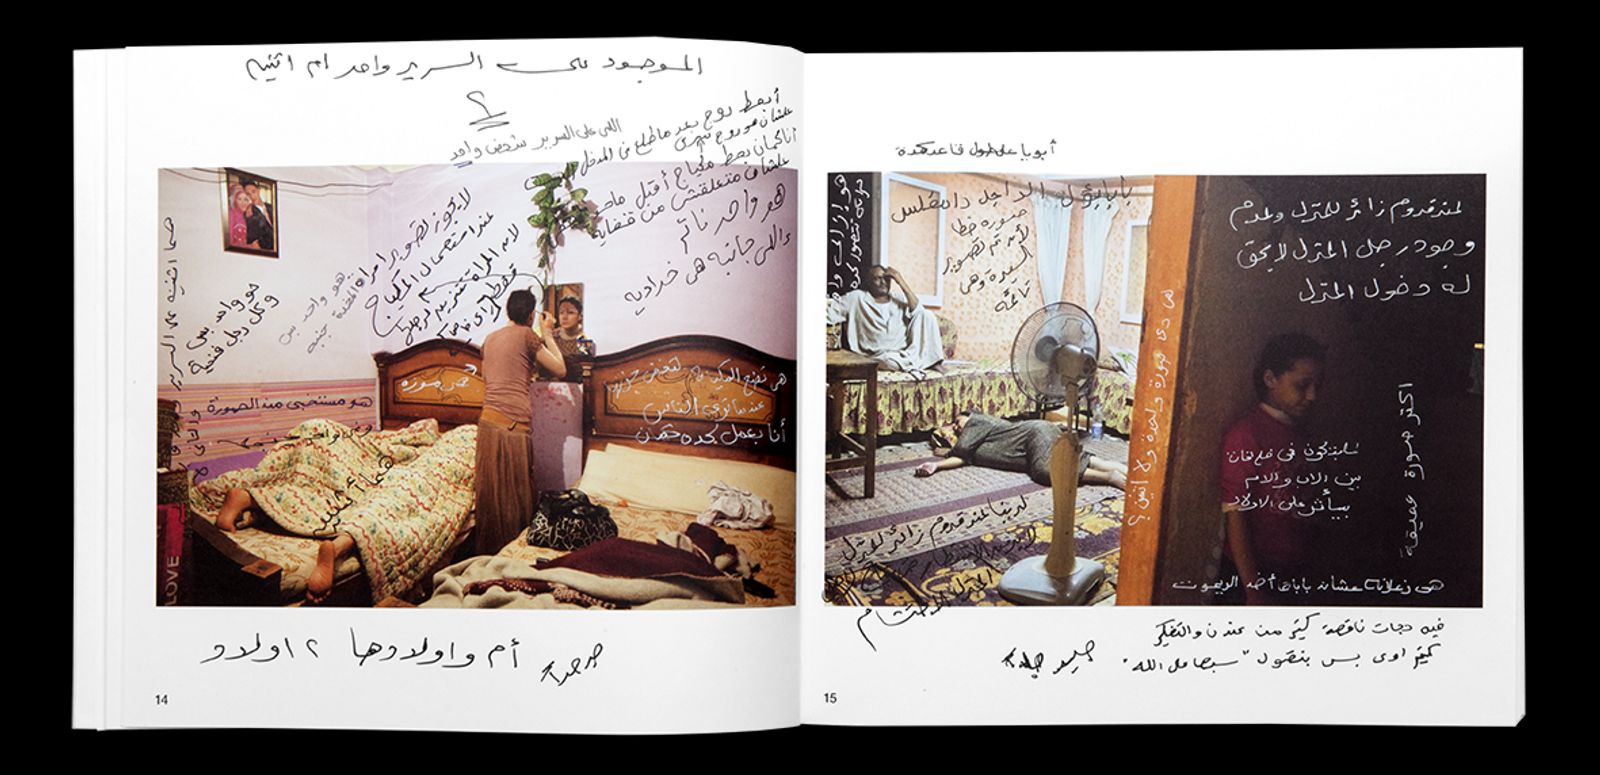 © Bieke Depoorter, spread from the book As it may be